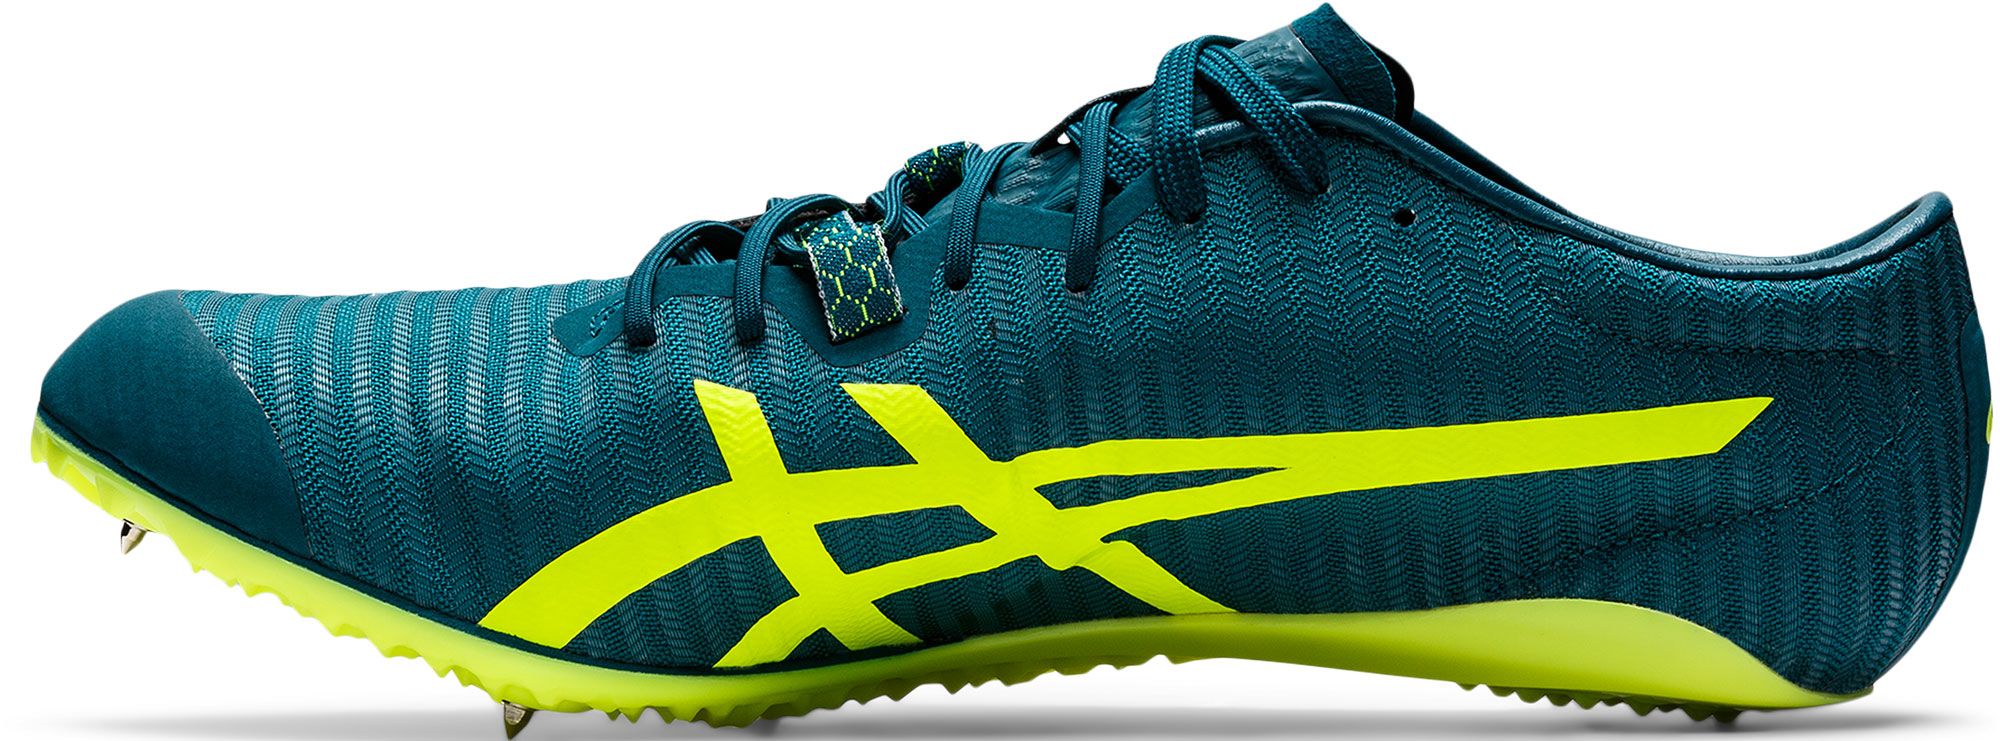 ASICS Sonicsprint Elite 2 Track and Field Shoes | The Market Place